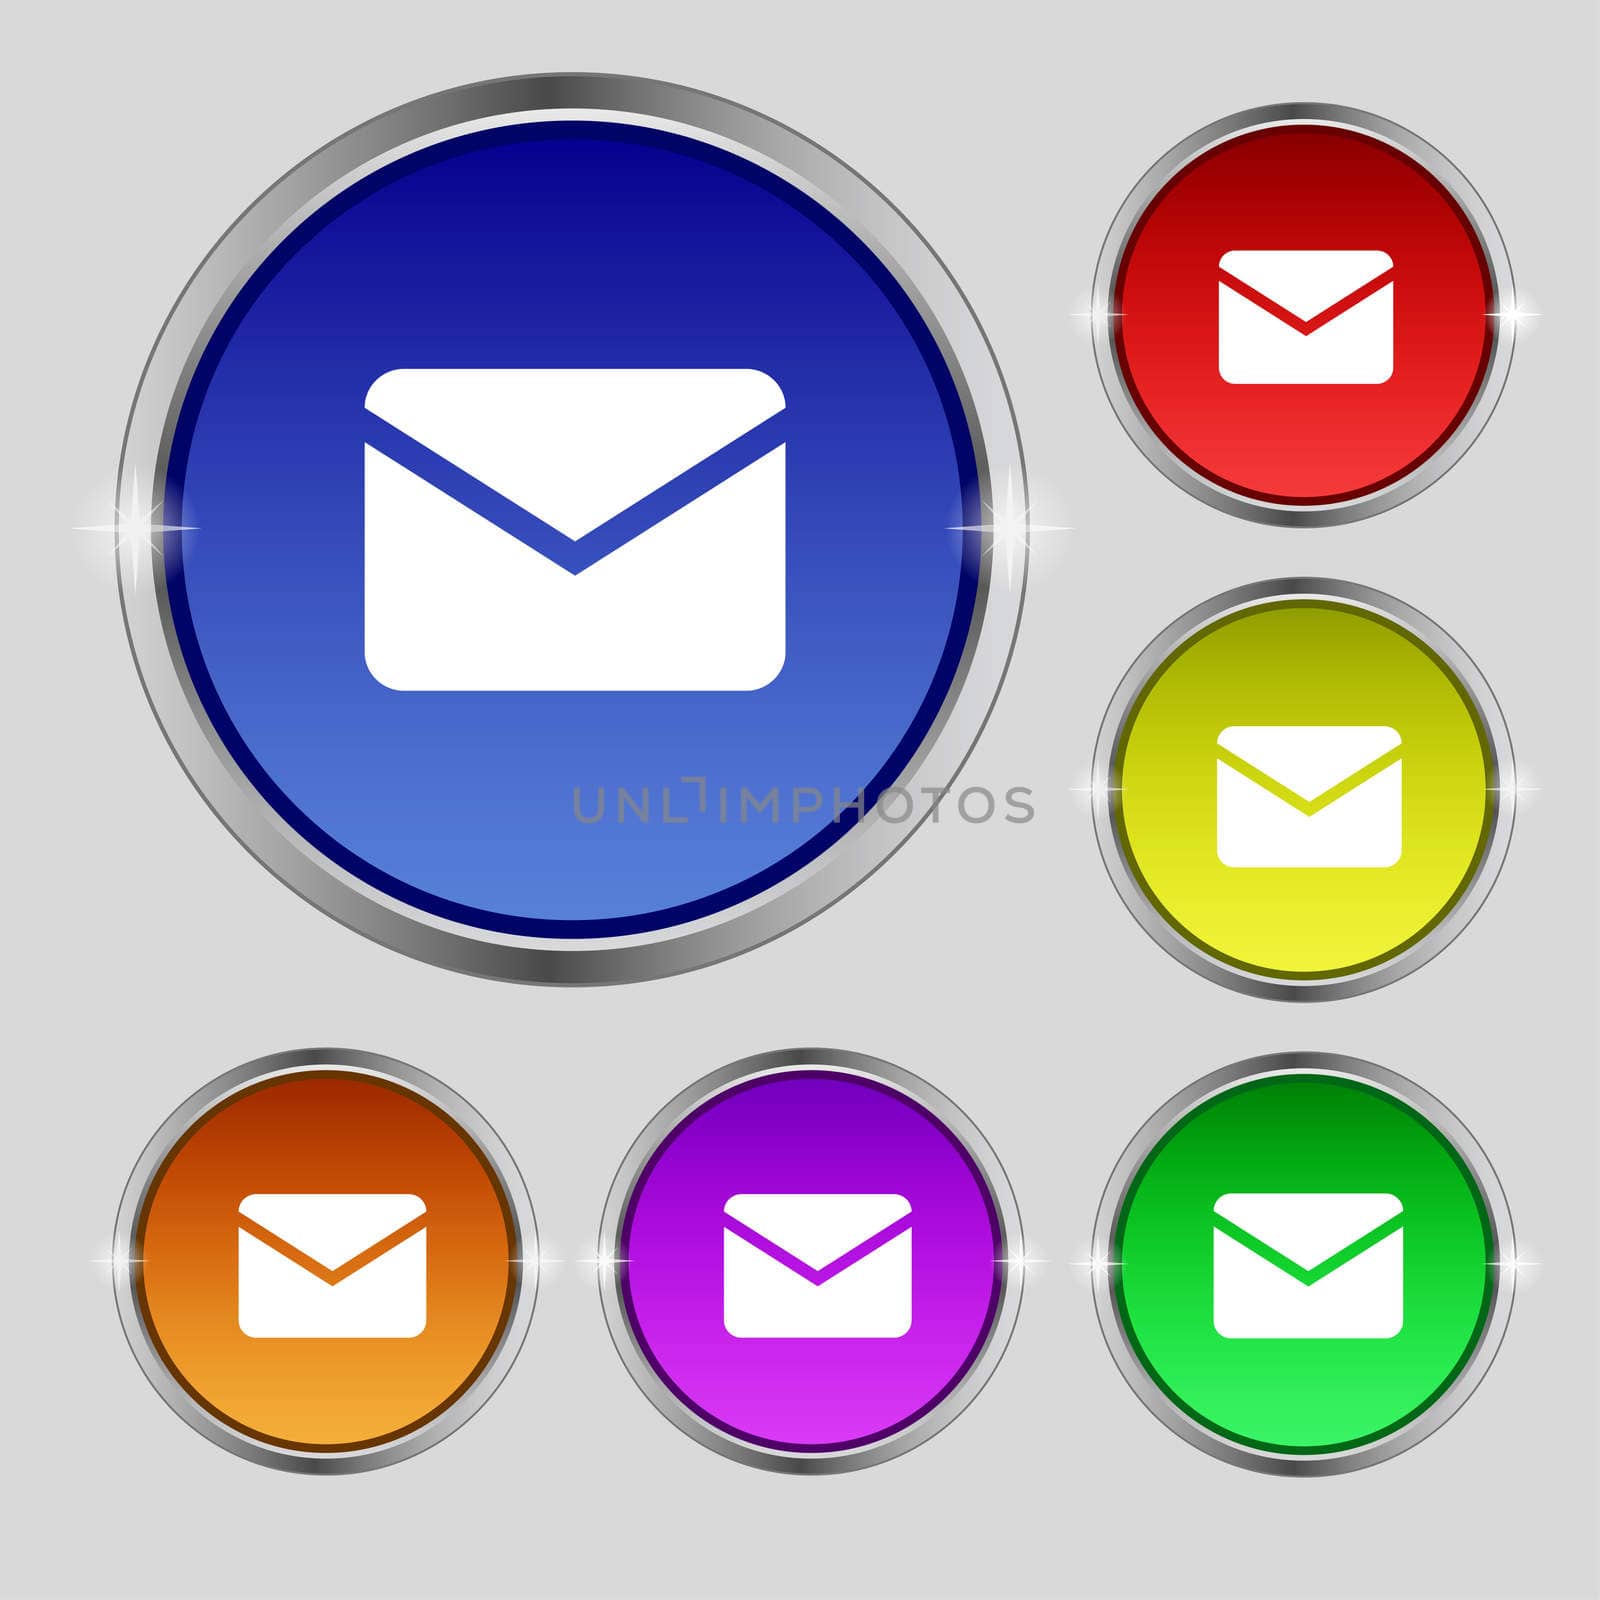 Mail, Envelope, Message icon sign. Round symbol on bright colourful buttons. illustration